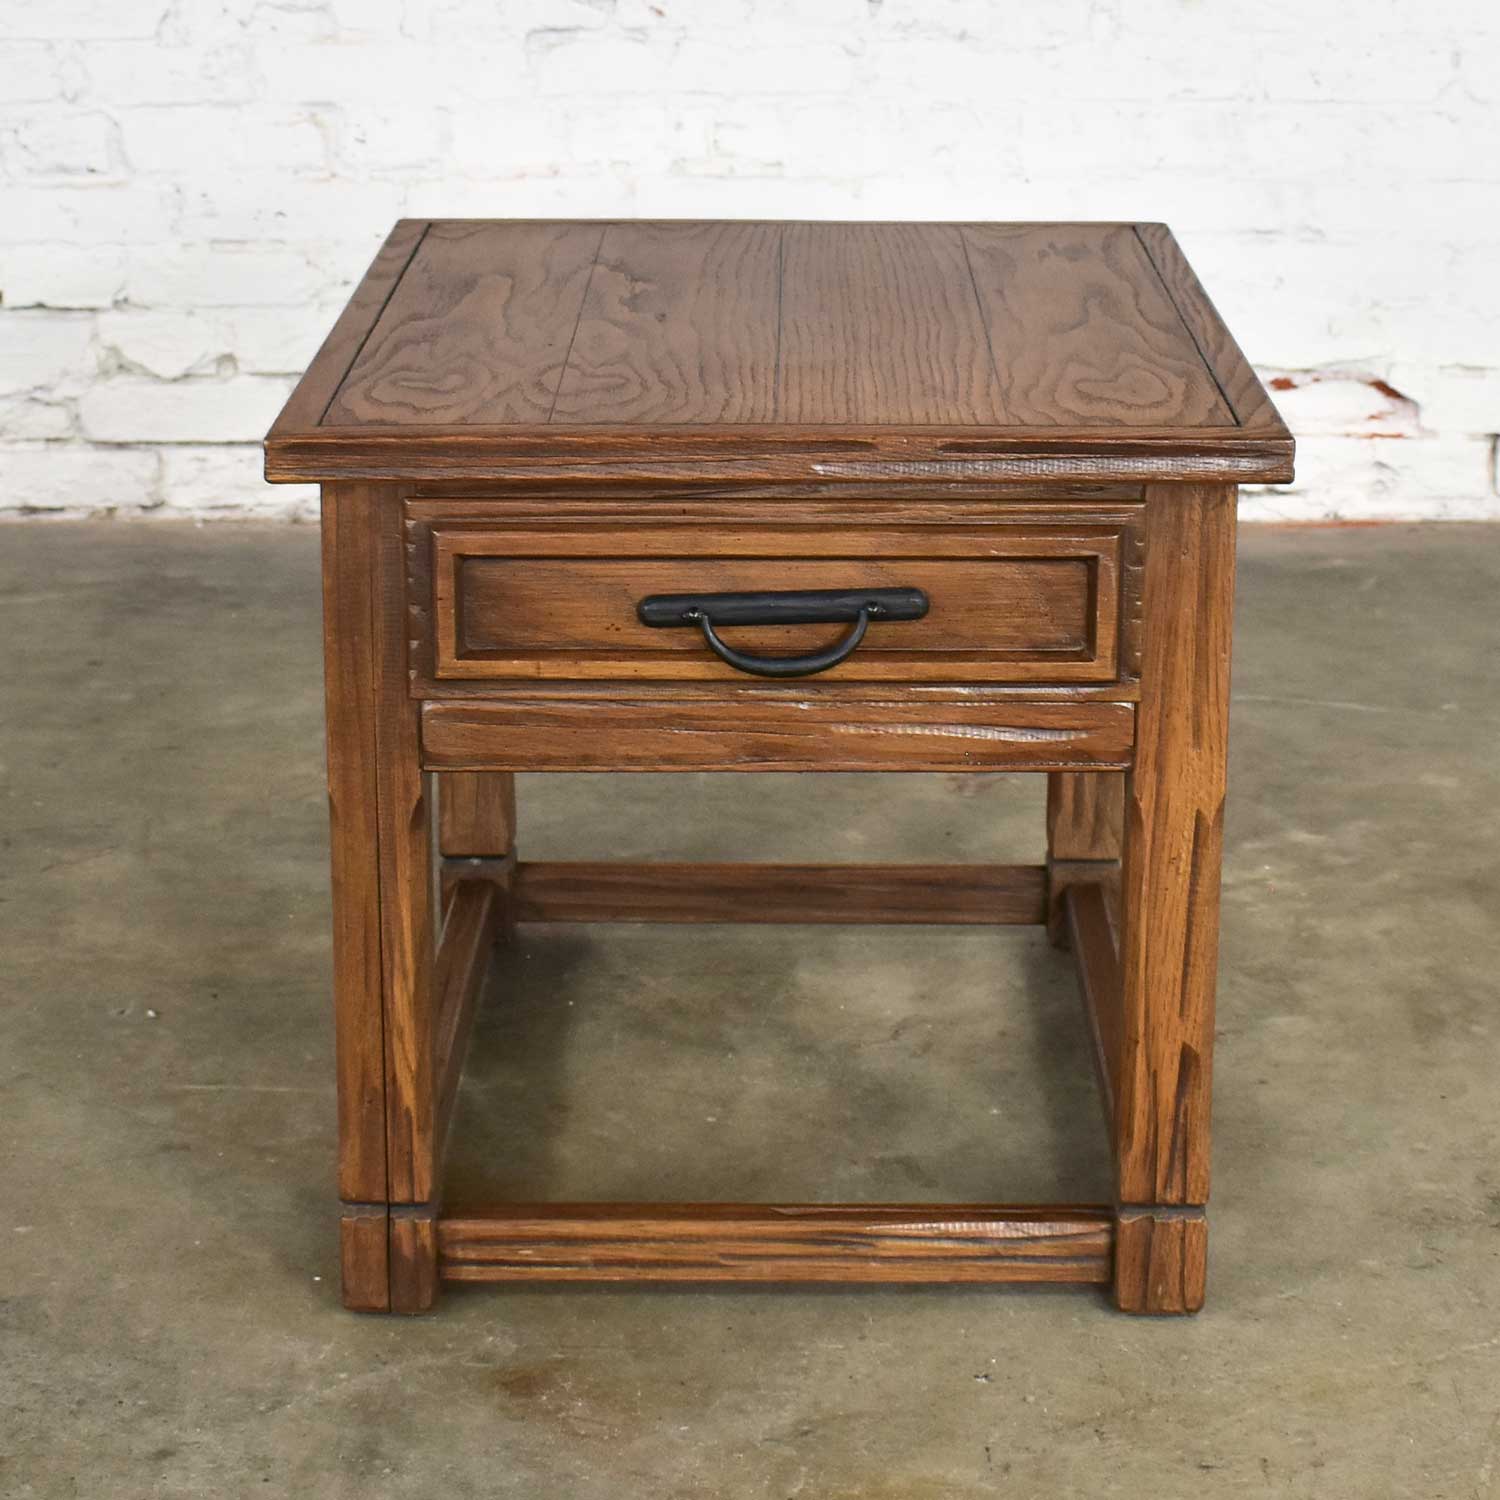 Vintage Ranch Oak Drawered End Table Acorn Brown Finish by A. Brandt